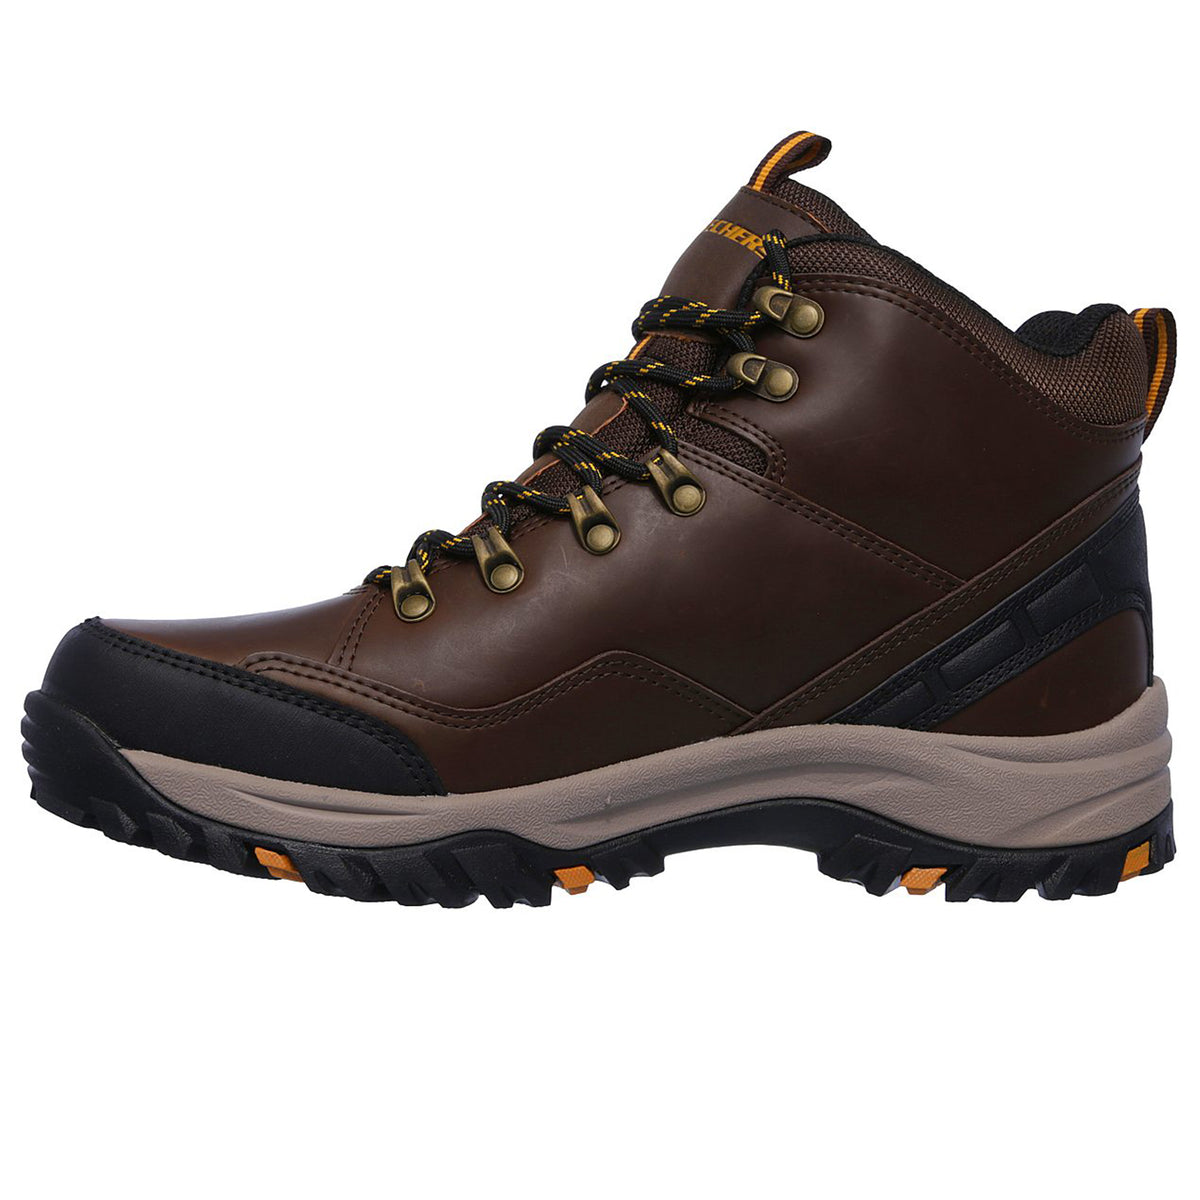 Skechers Men's 65529 Fit Traven Waterproof Hiking Boot That Shoe Store and More